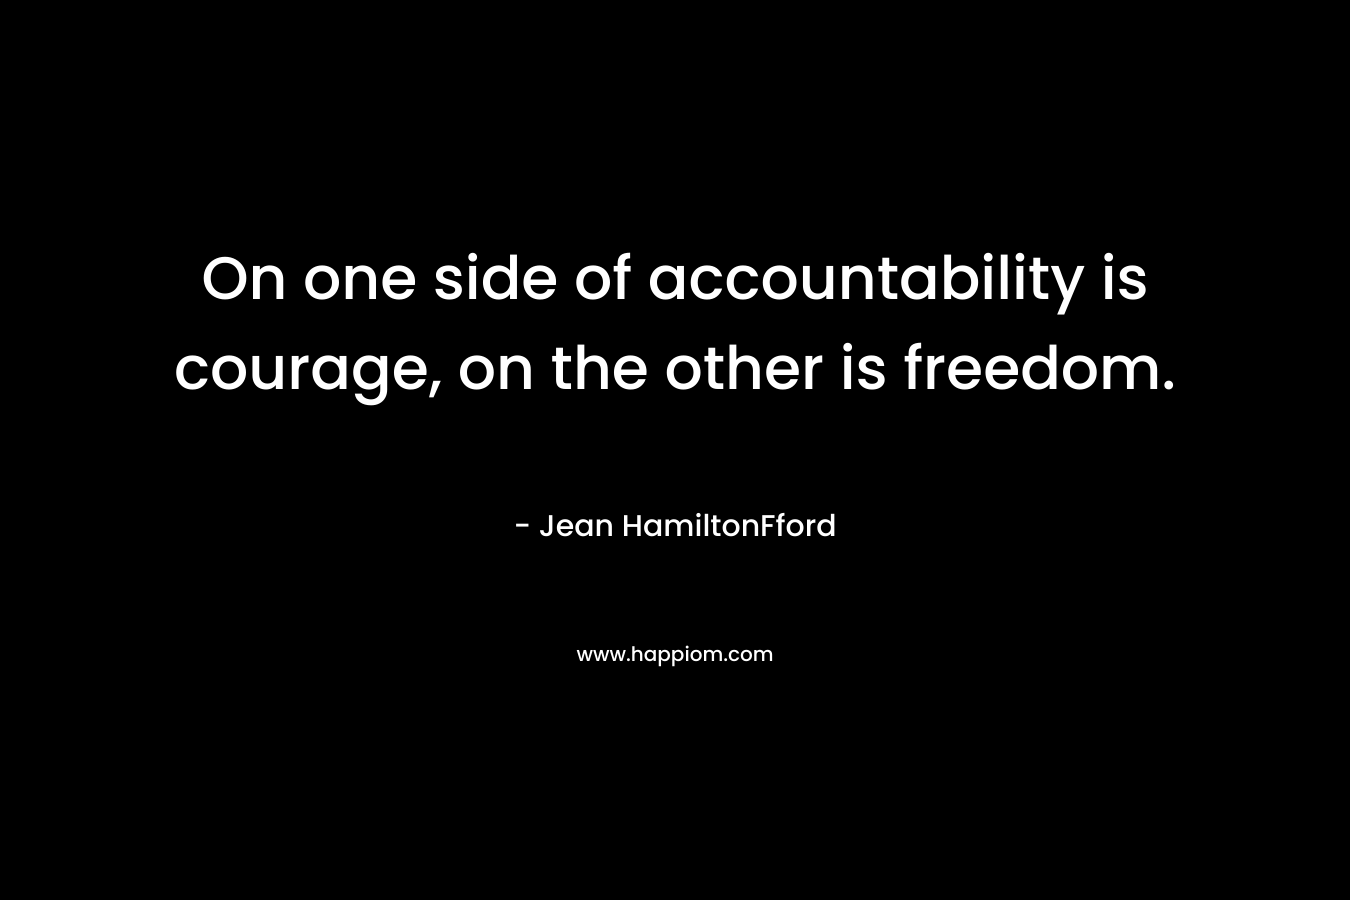 On one side of accountability is courage, on the other is freedom. – Jean HamiltonFford